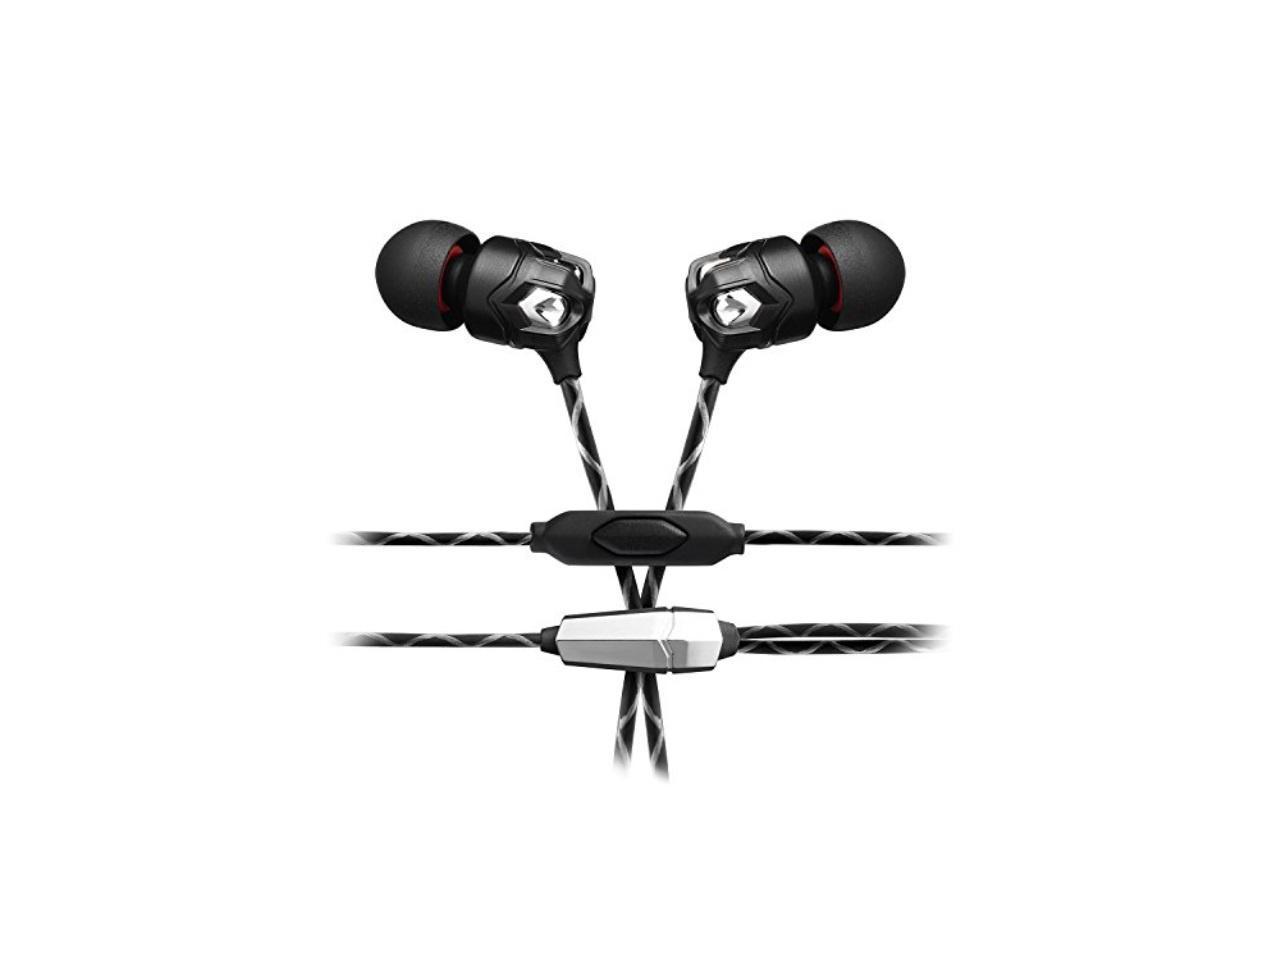 V-MODA Zn In-Ear Modern Audiophile Headphones with 1 Button and Microphone - Newegg.com